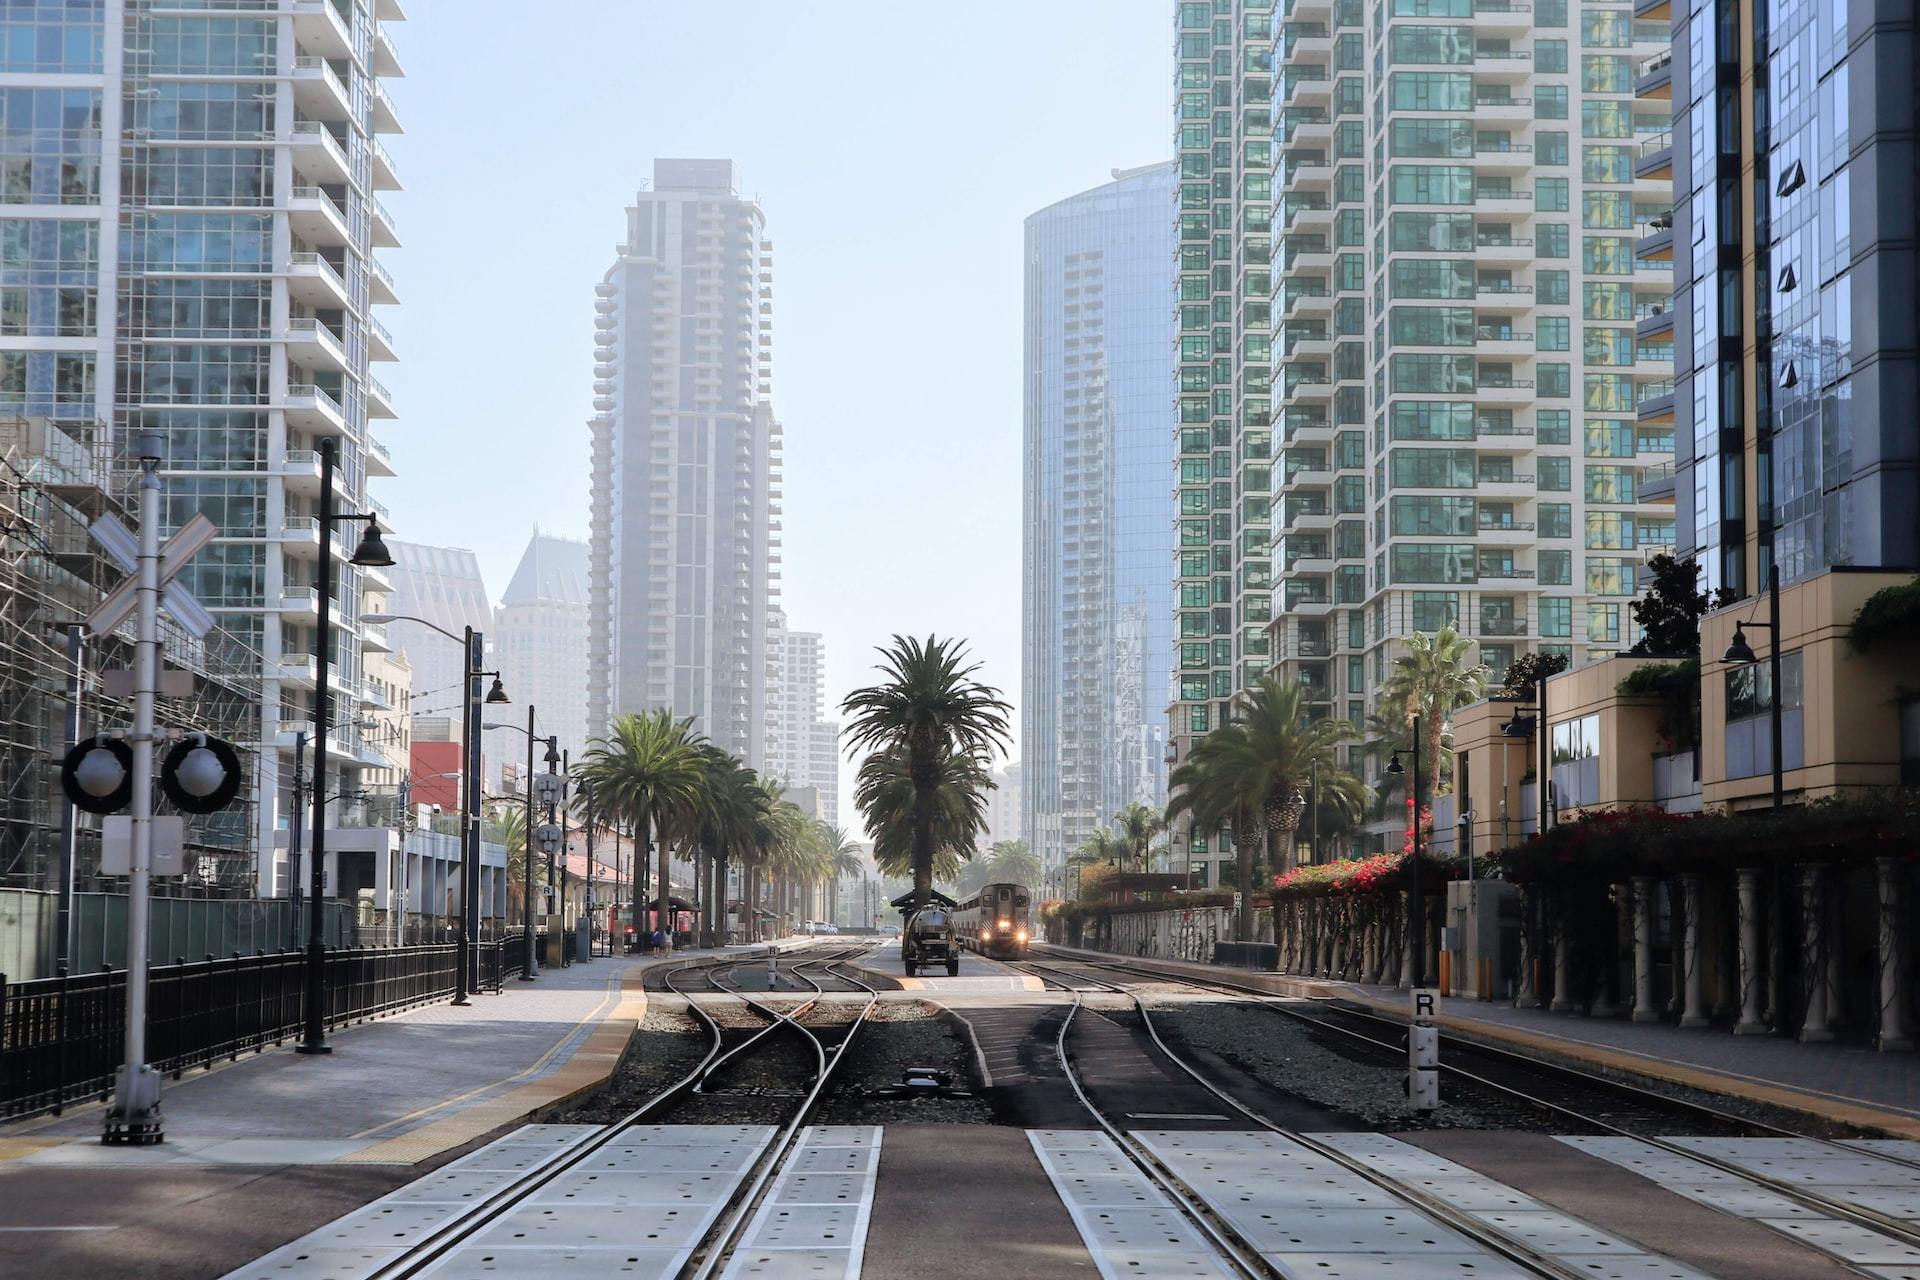 Train tracks and palm trees in between skyscrapers in San Diego.